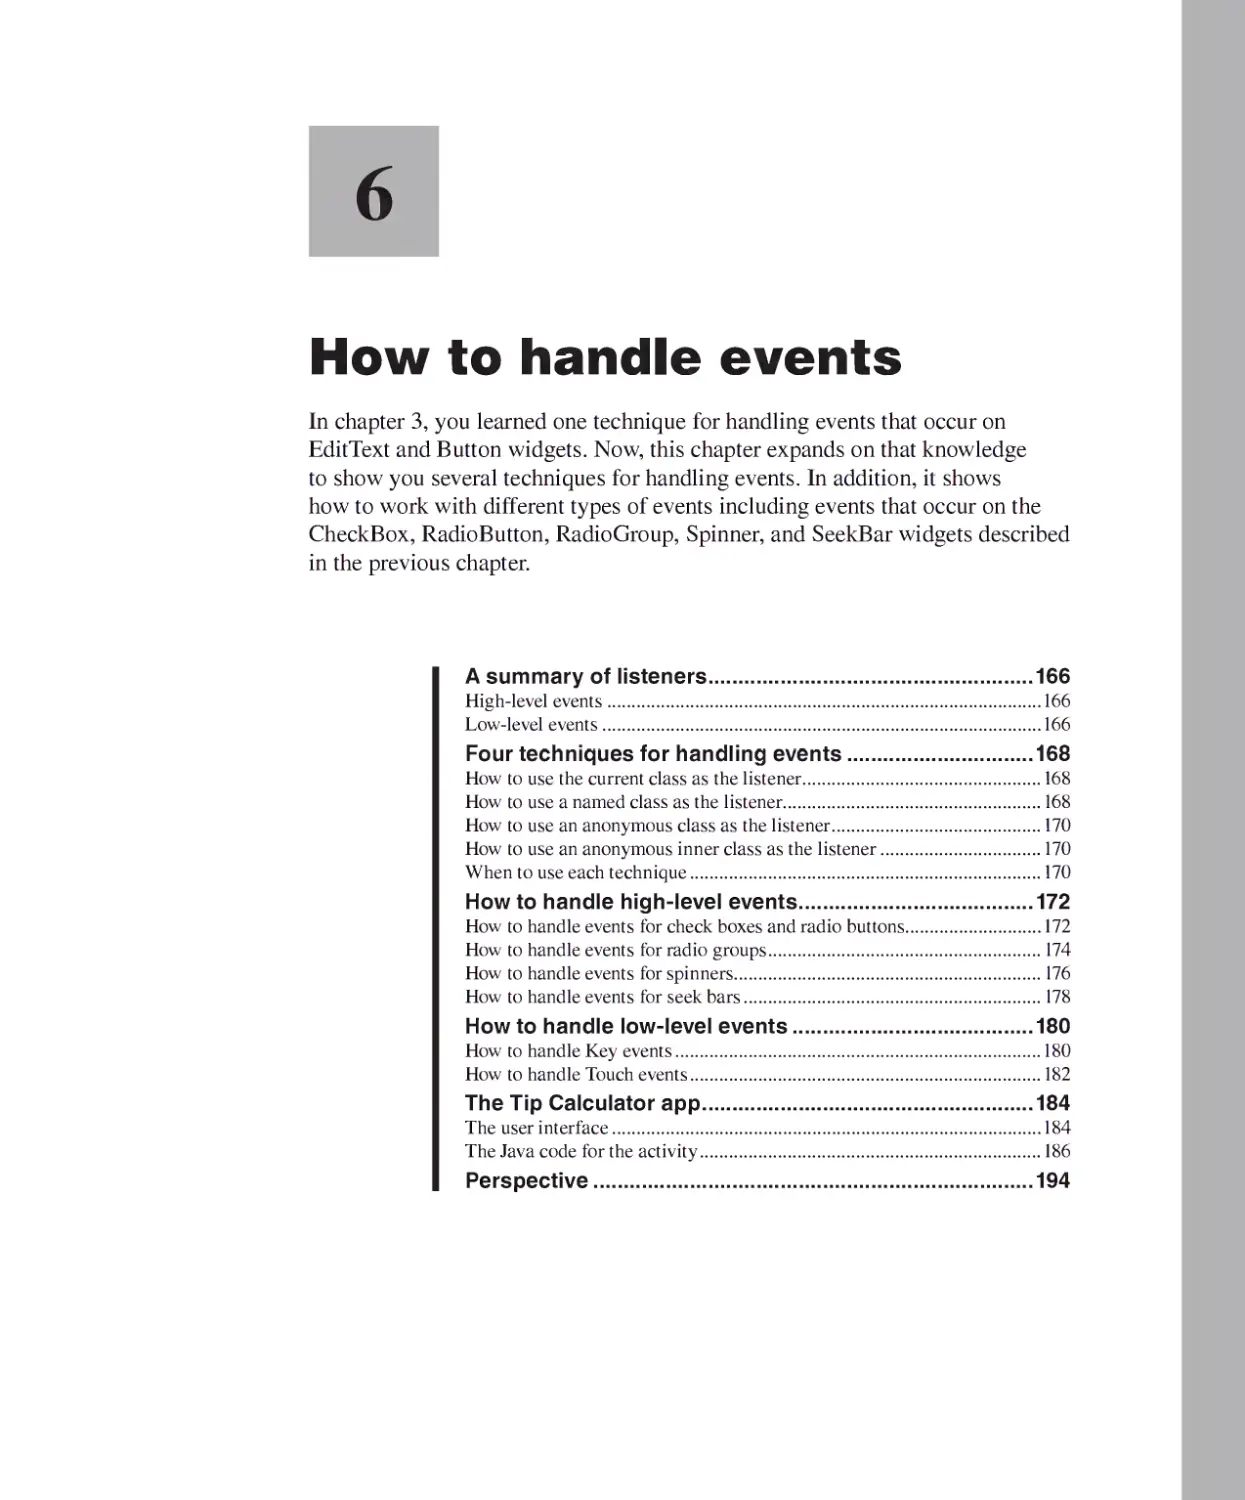 Chapter 6 - How to Handle Events